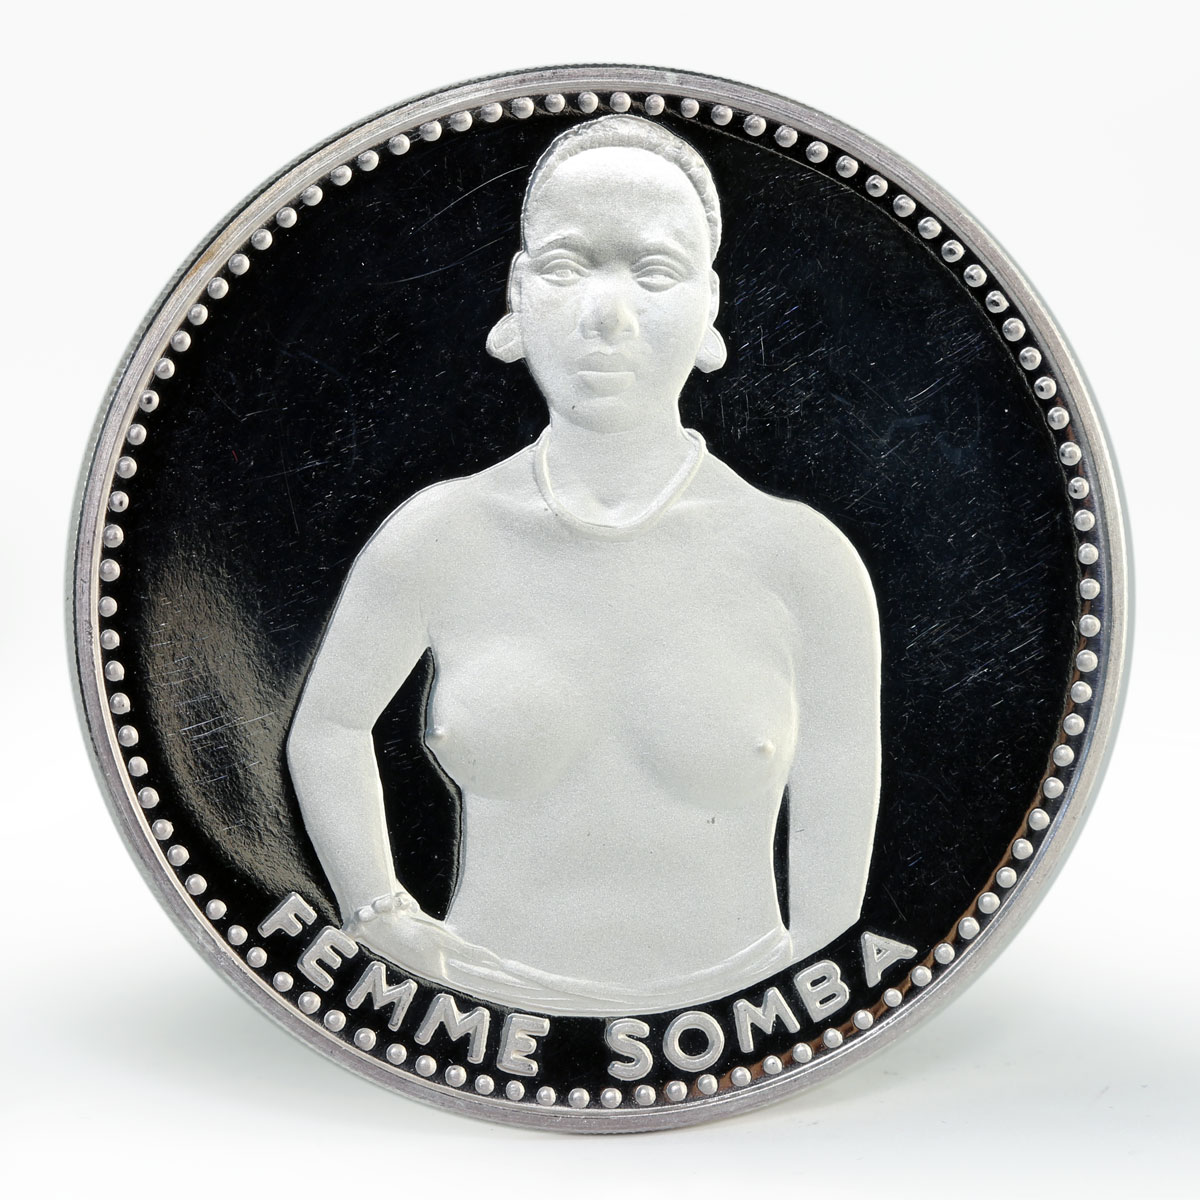 Dahomey 1000 francs 10th of Independence Somba Woman silver coin 1971